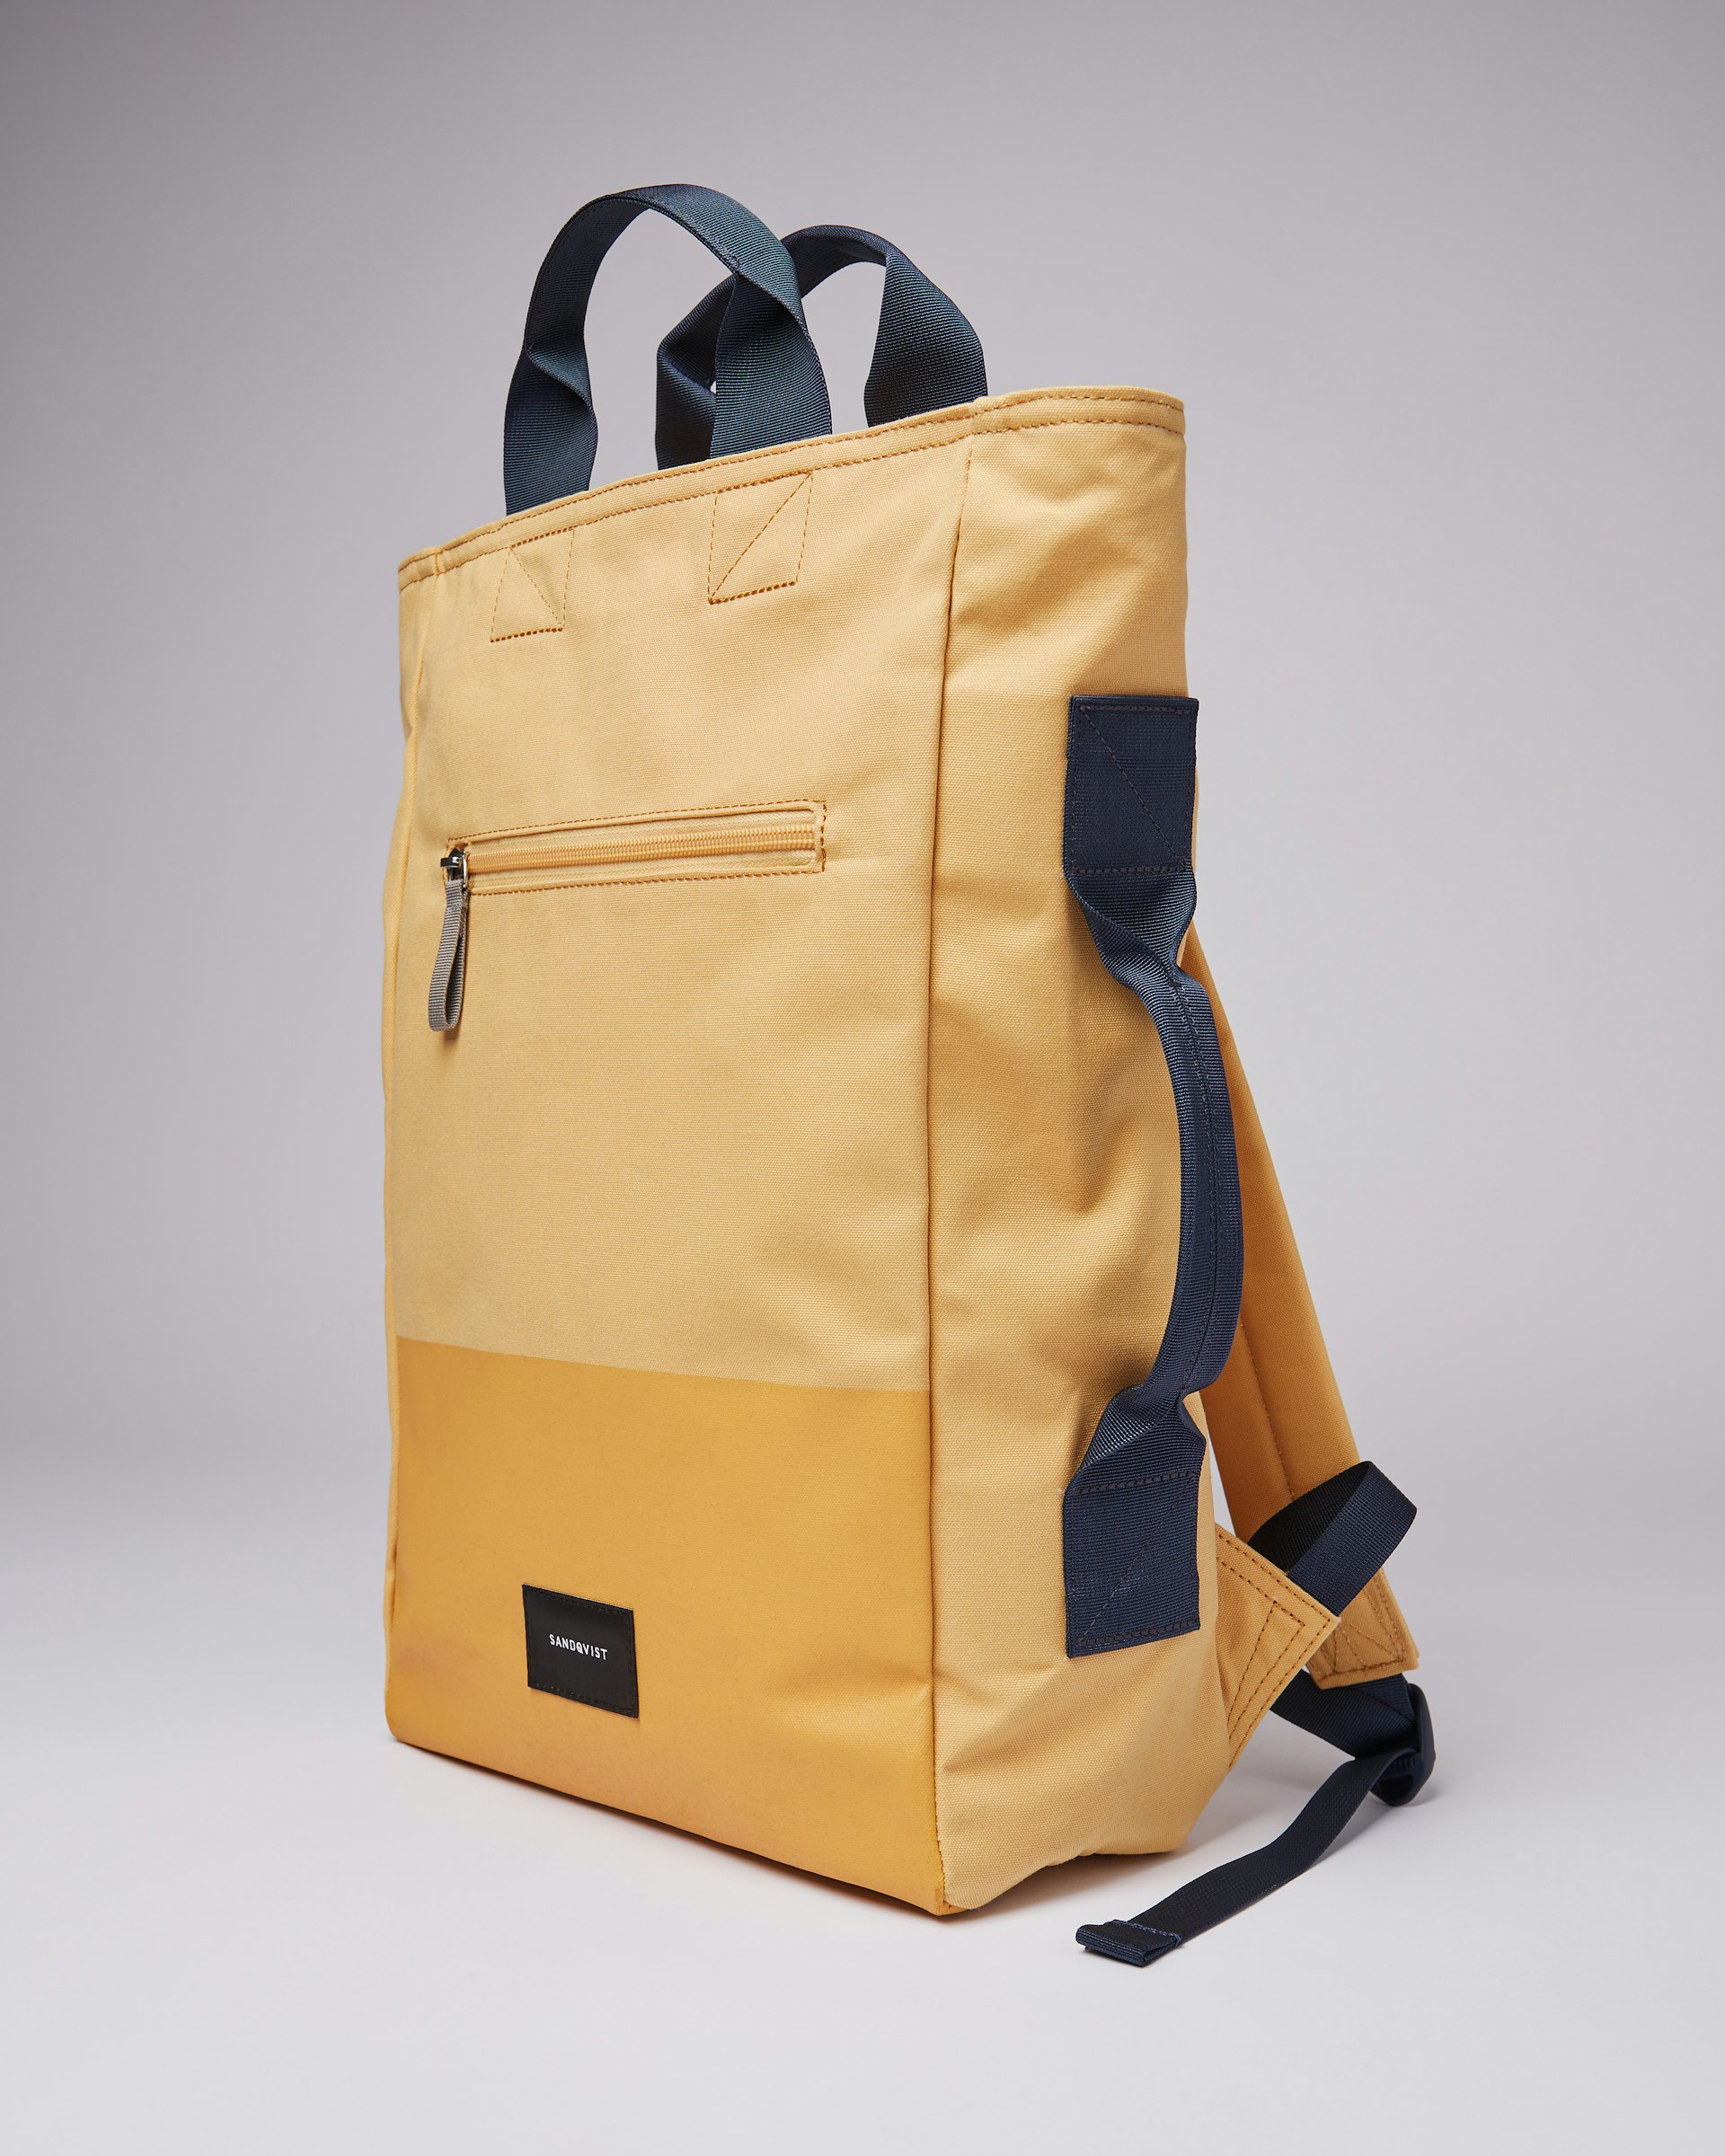 Tony vegan belongs to the category Backpacks and is in color yellow leaf (3 of 6)